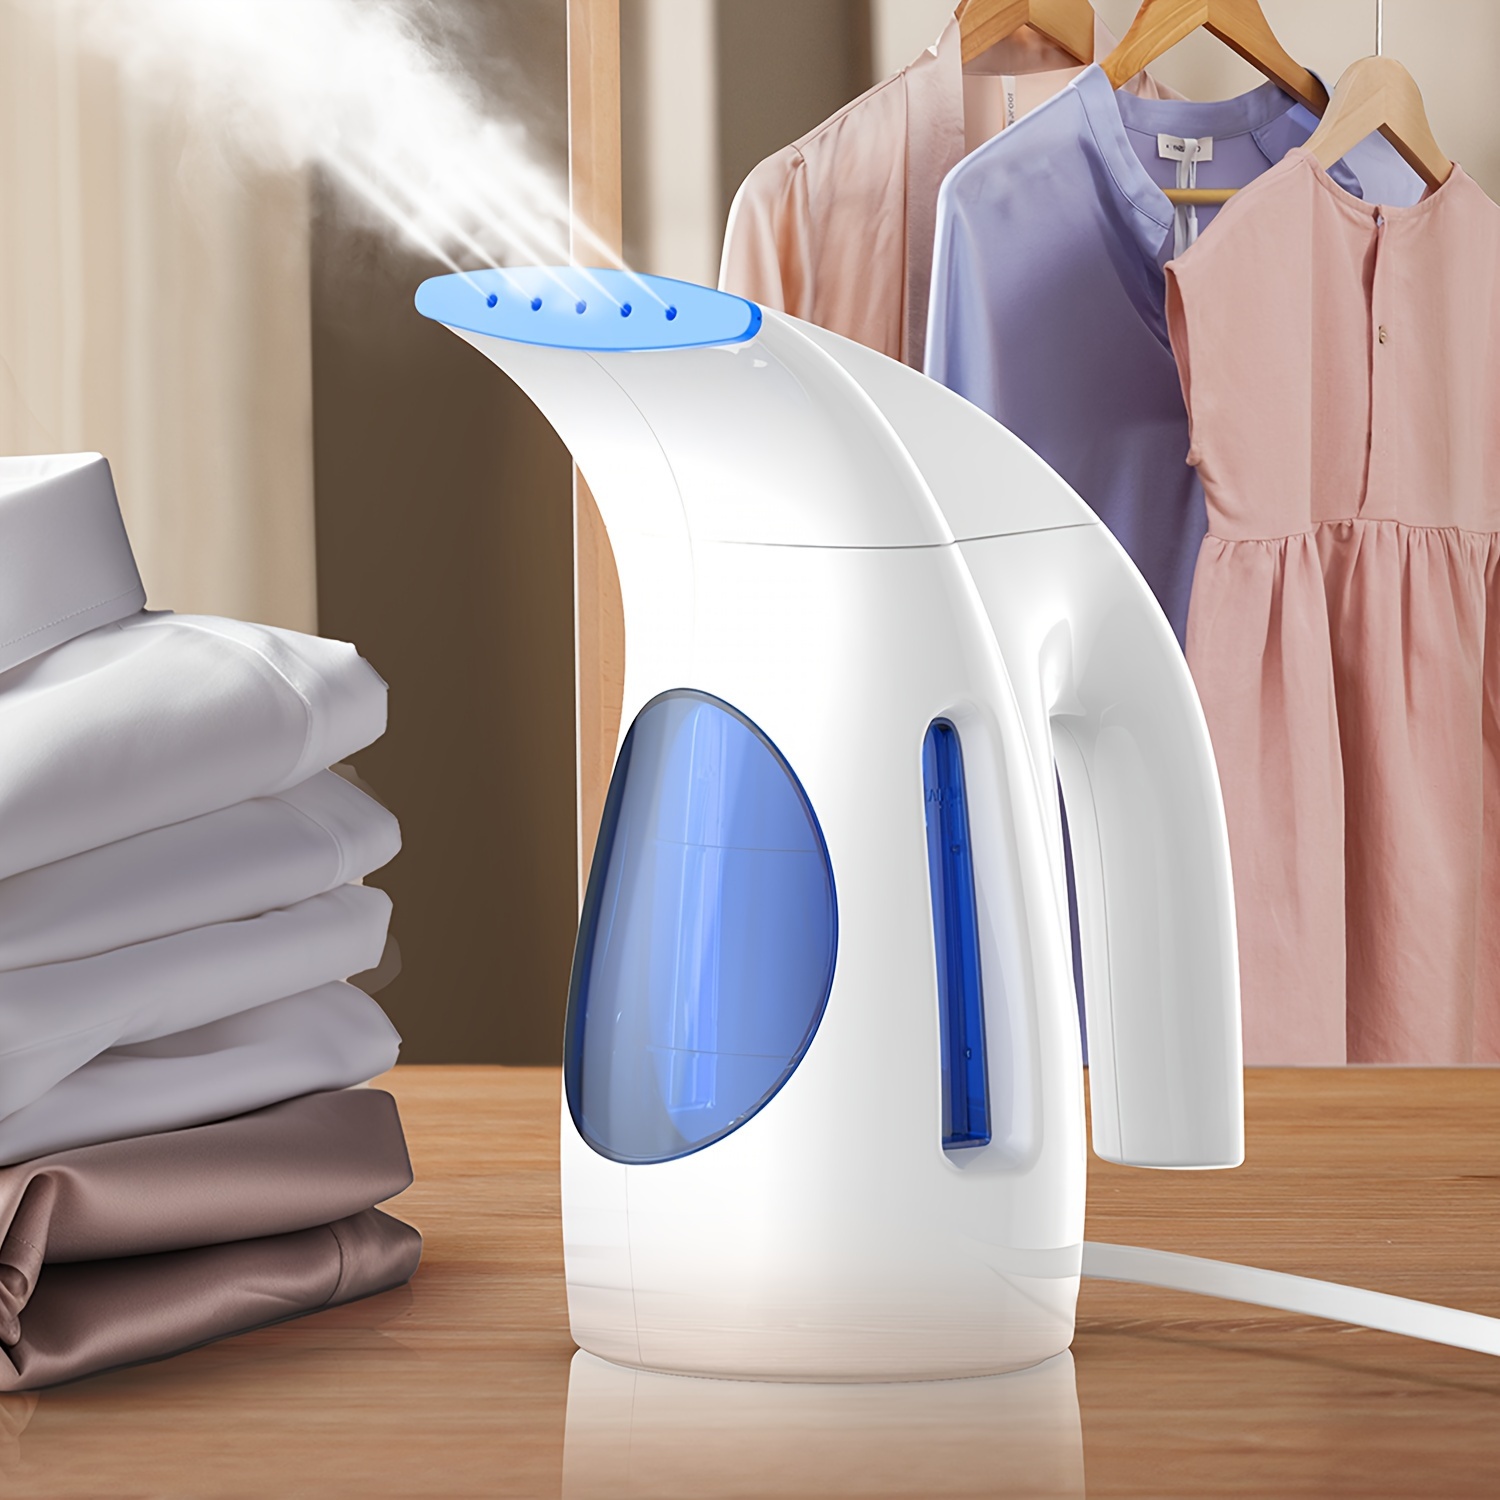 

Hilife Steamer For Clothes, Home Goodies, Portable Handheld Design, 240ml Big Capacity, 700w, Strong Penetrating Steam, Removes Wrinkle, For Home, Office And Travel